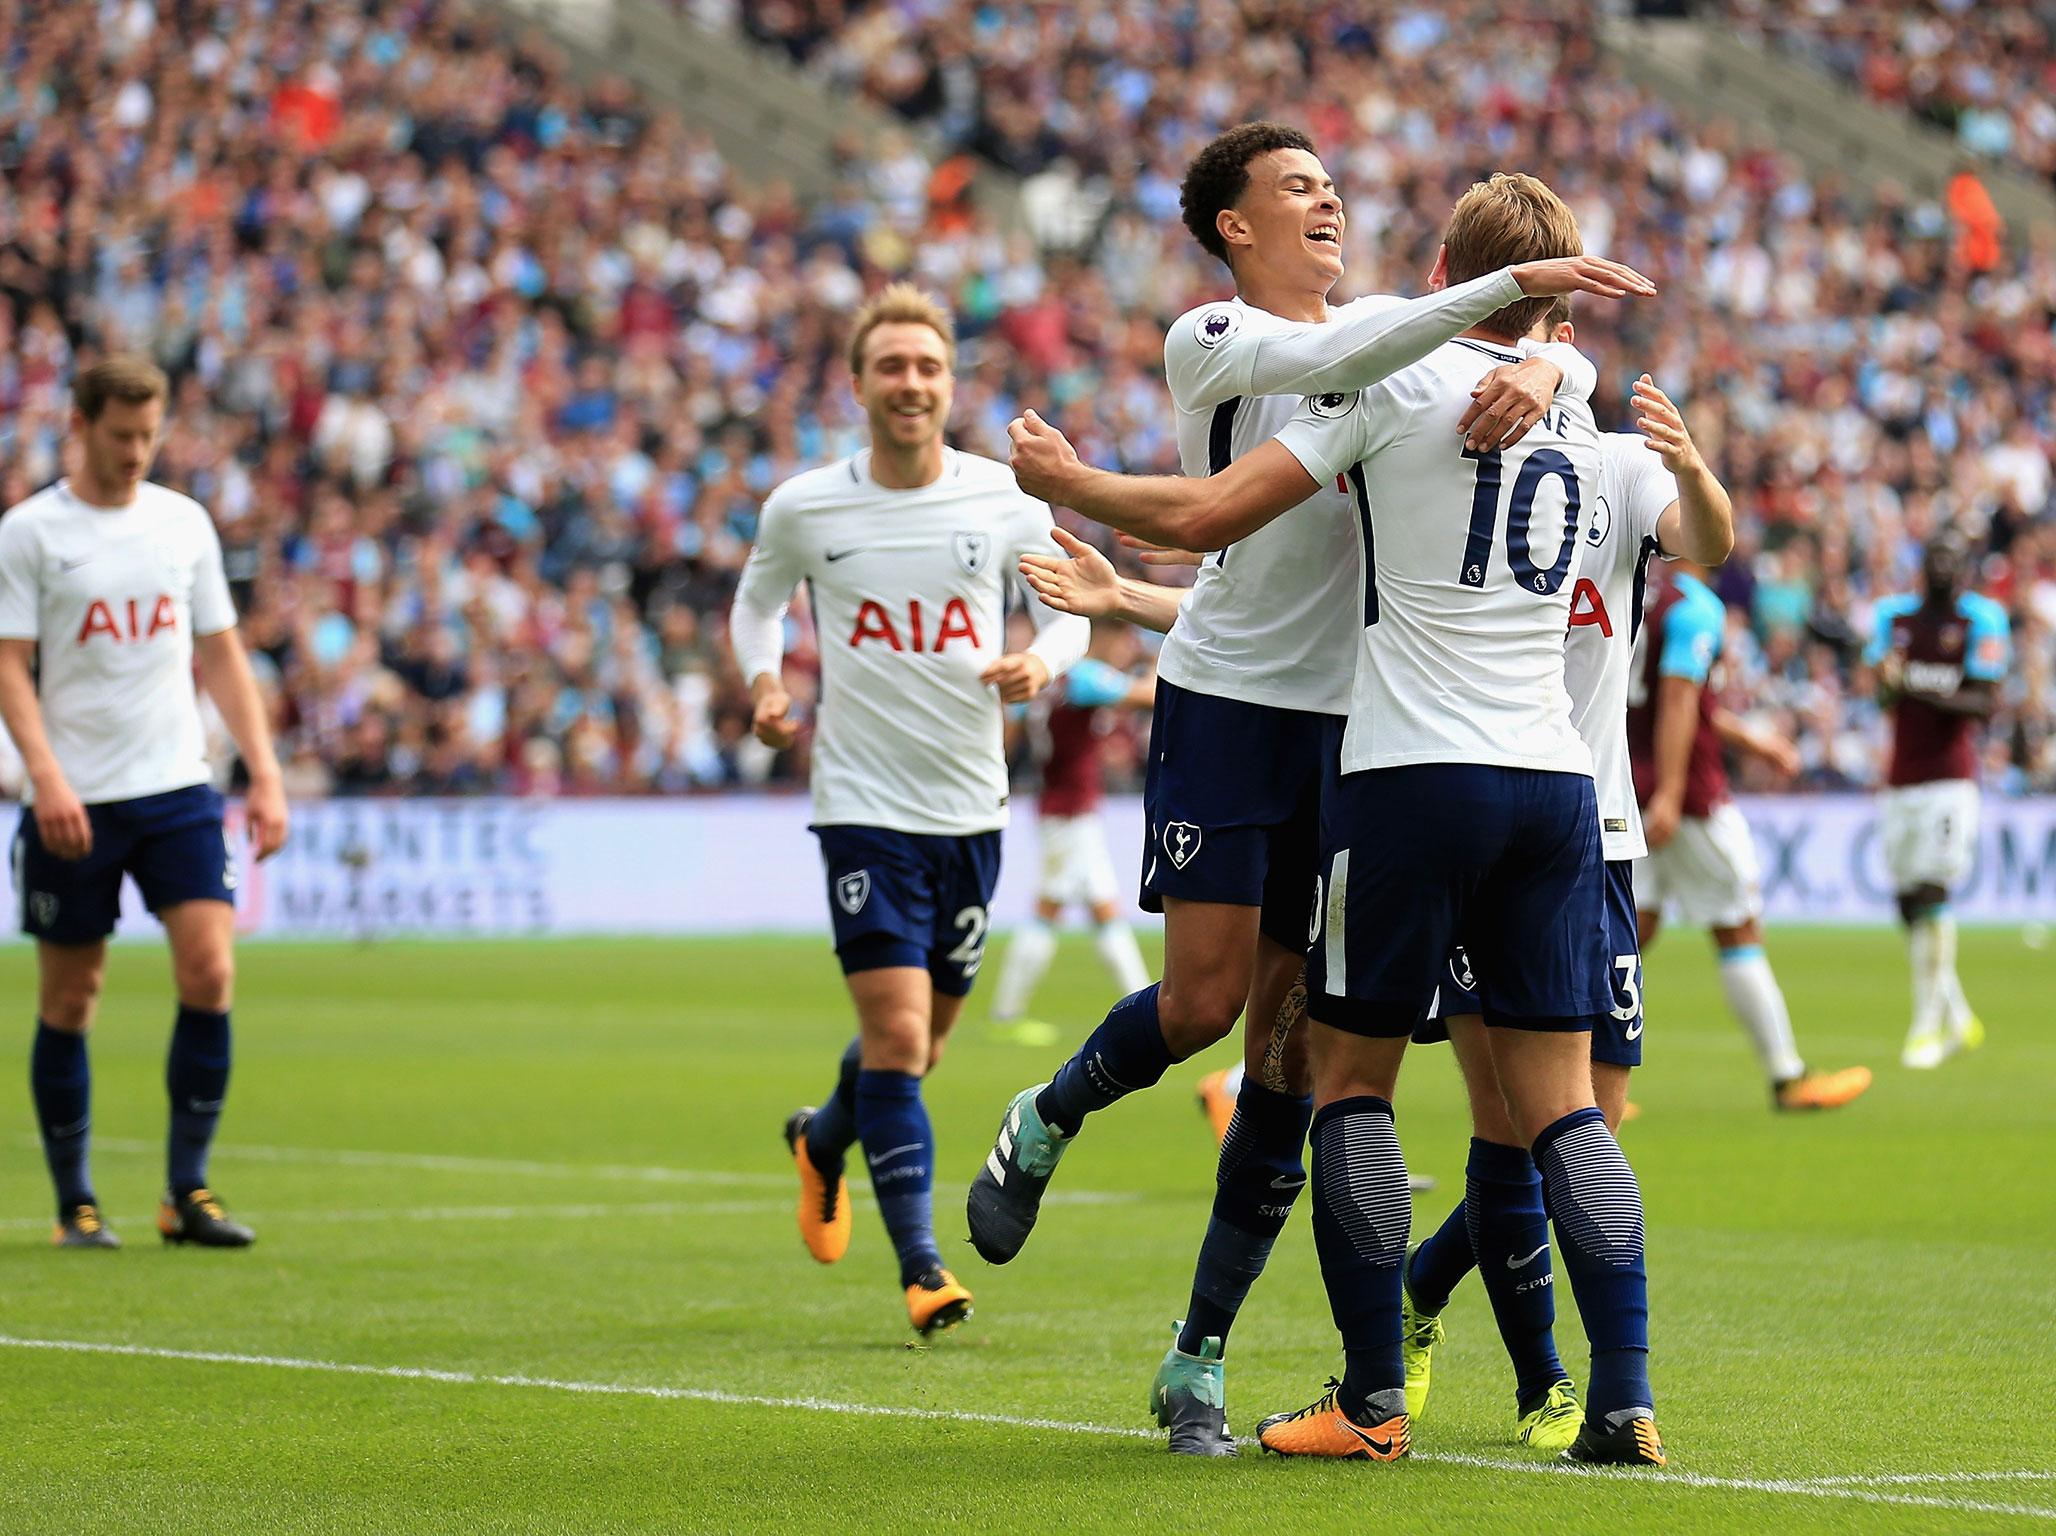 West Ham vs Tottenham: 5 things we learned from Spurs' 3-2 win over the